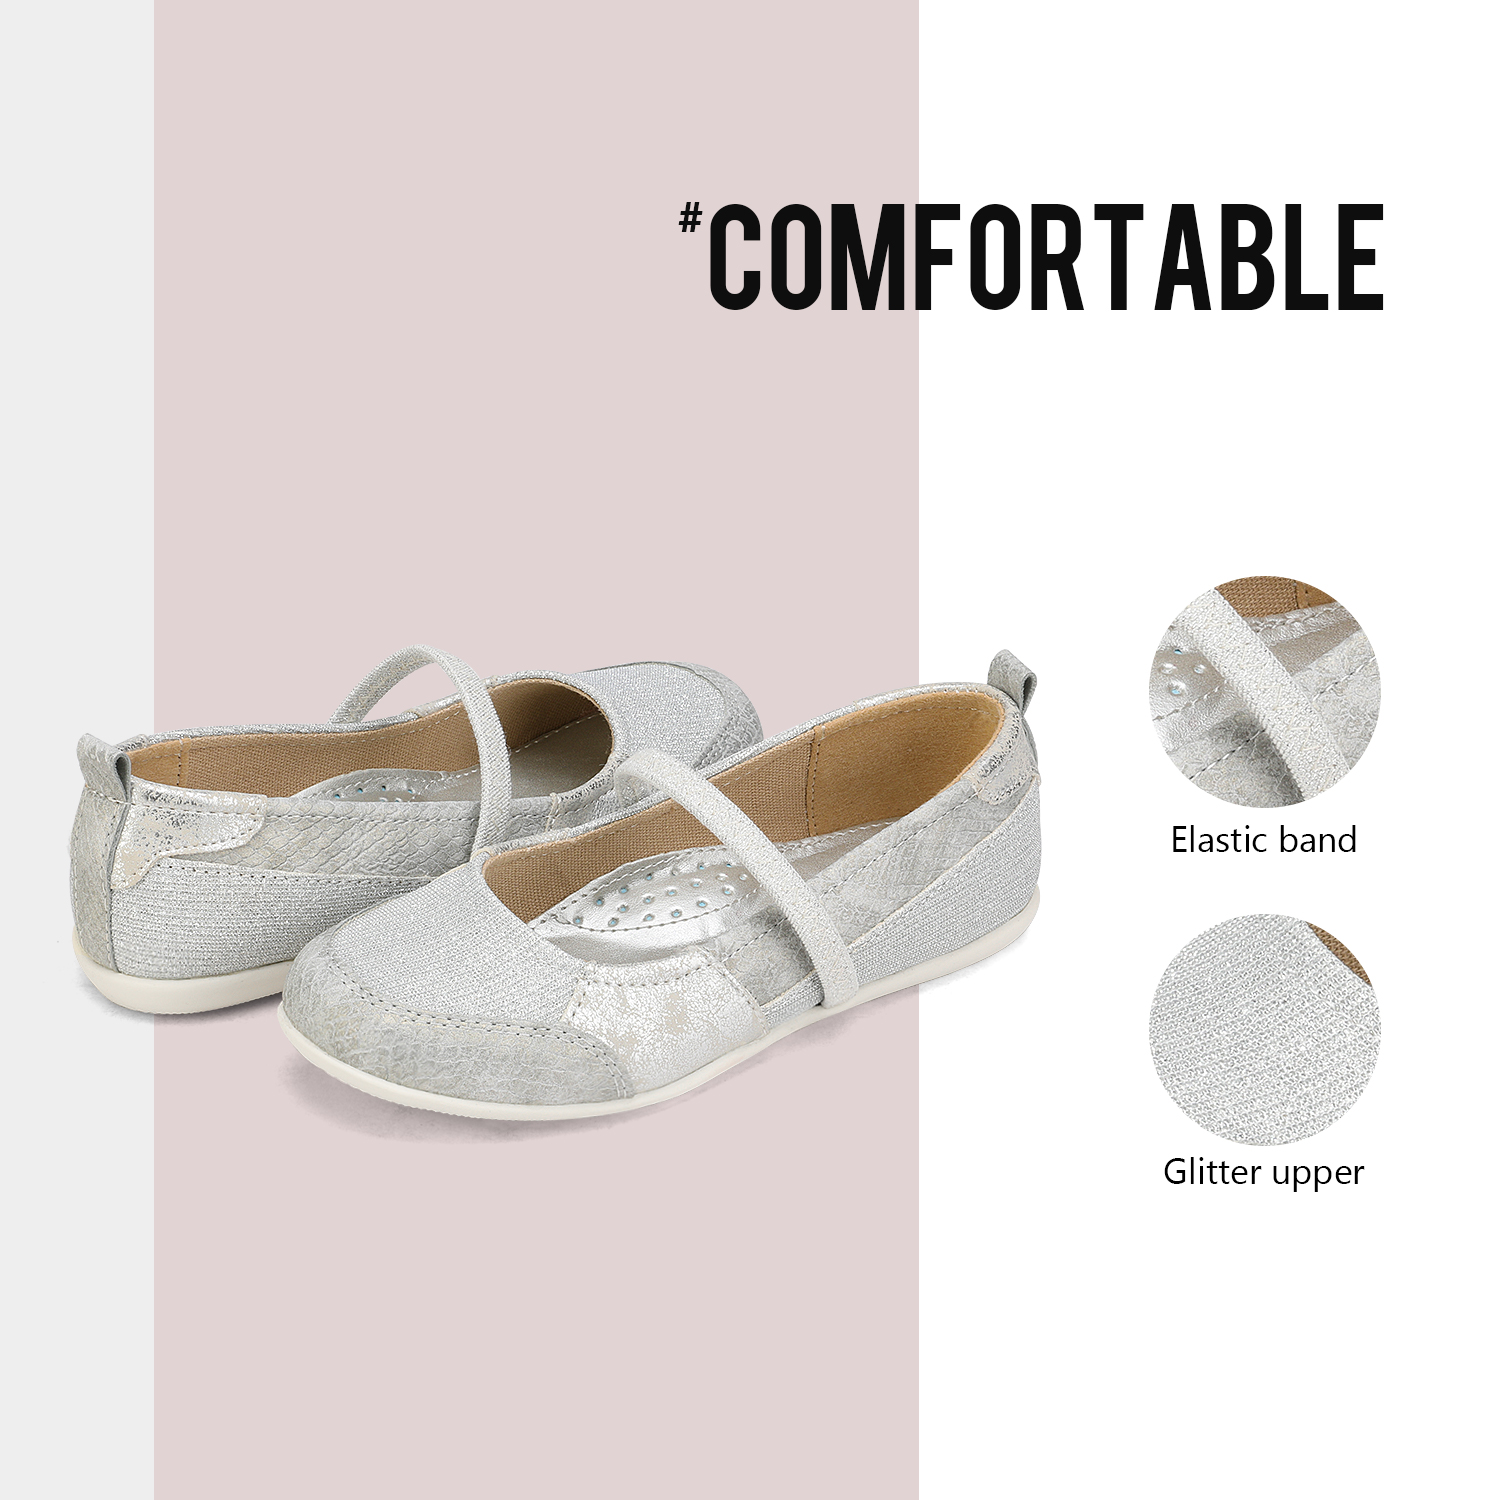 Dream Pairs Girls Mary Jane Flats Shoes Comfort School Casual Shoes Slip On Flat Shoes For Kids SASA-2 SILVER Size 10 - image 3 of 5